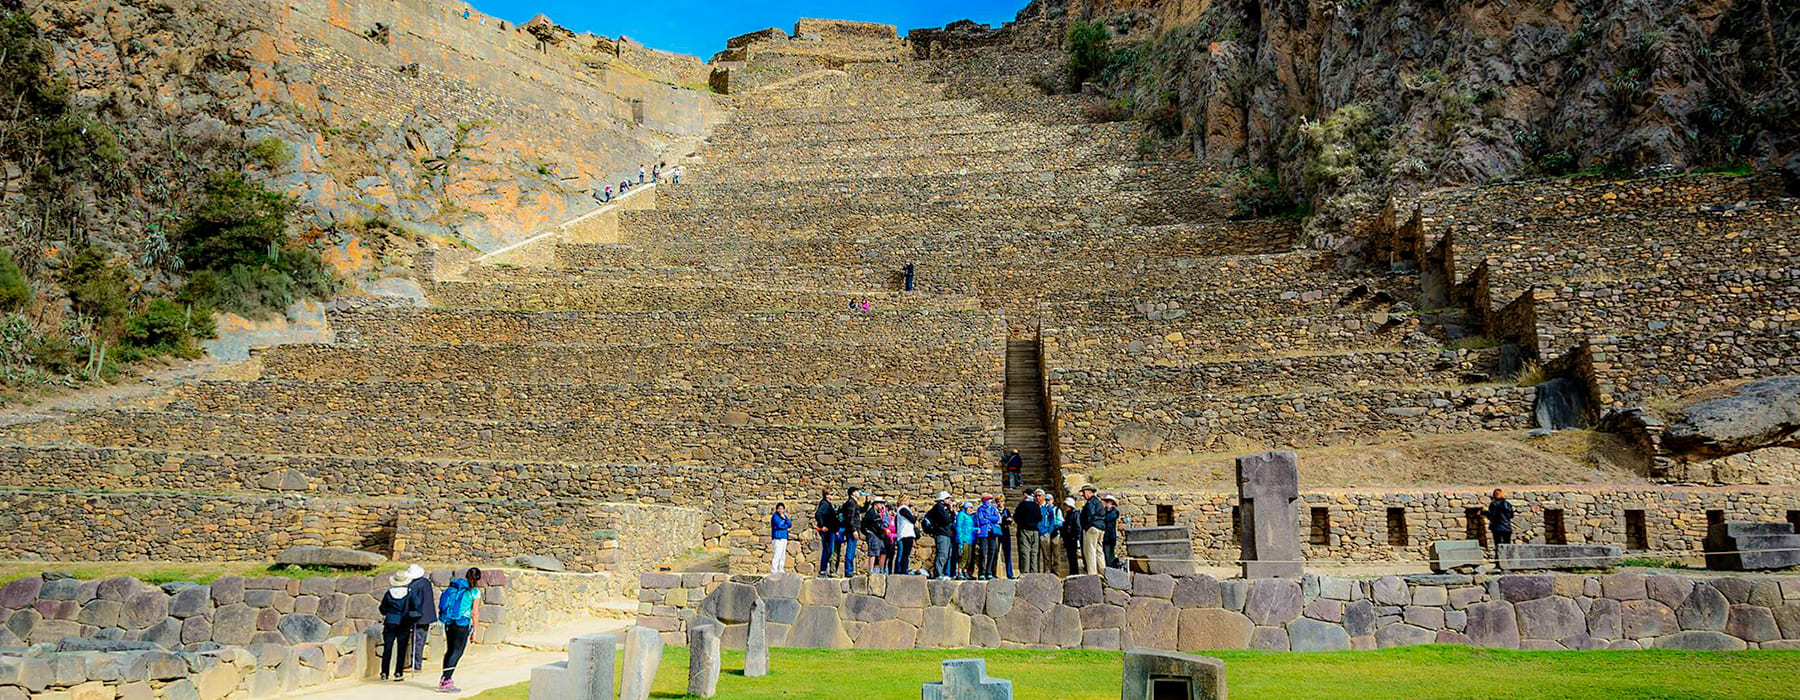 OLLANTAYTAMBO RUINS, THE MOST IMPORTANT IN THE SACRED VALLEY